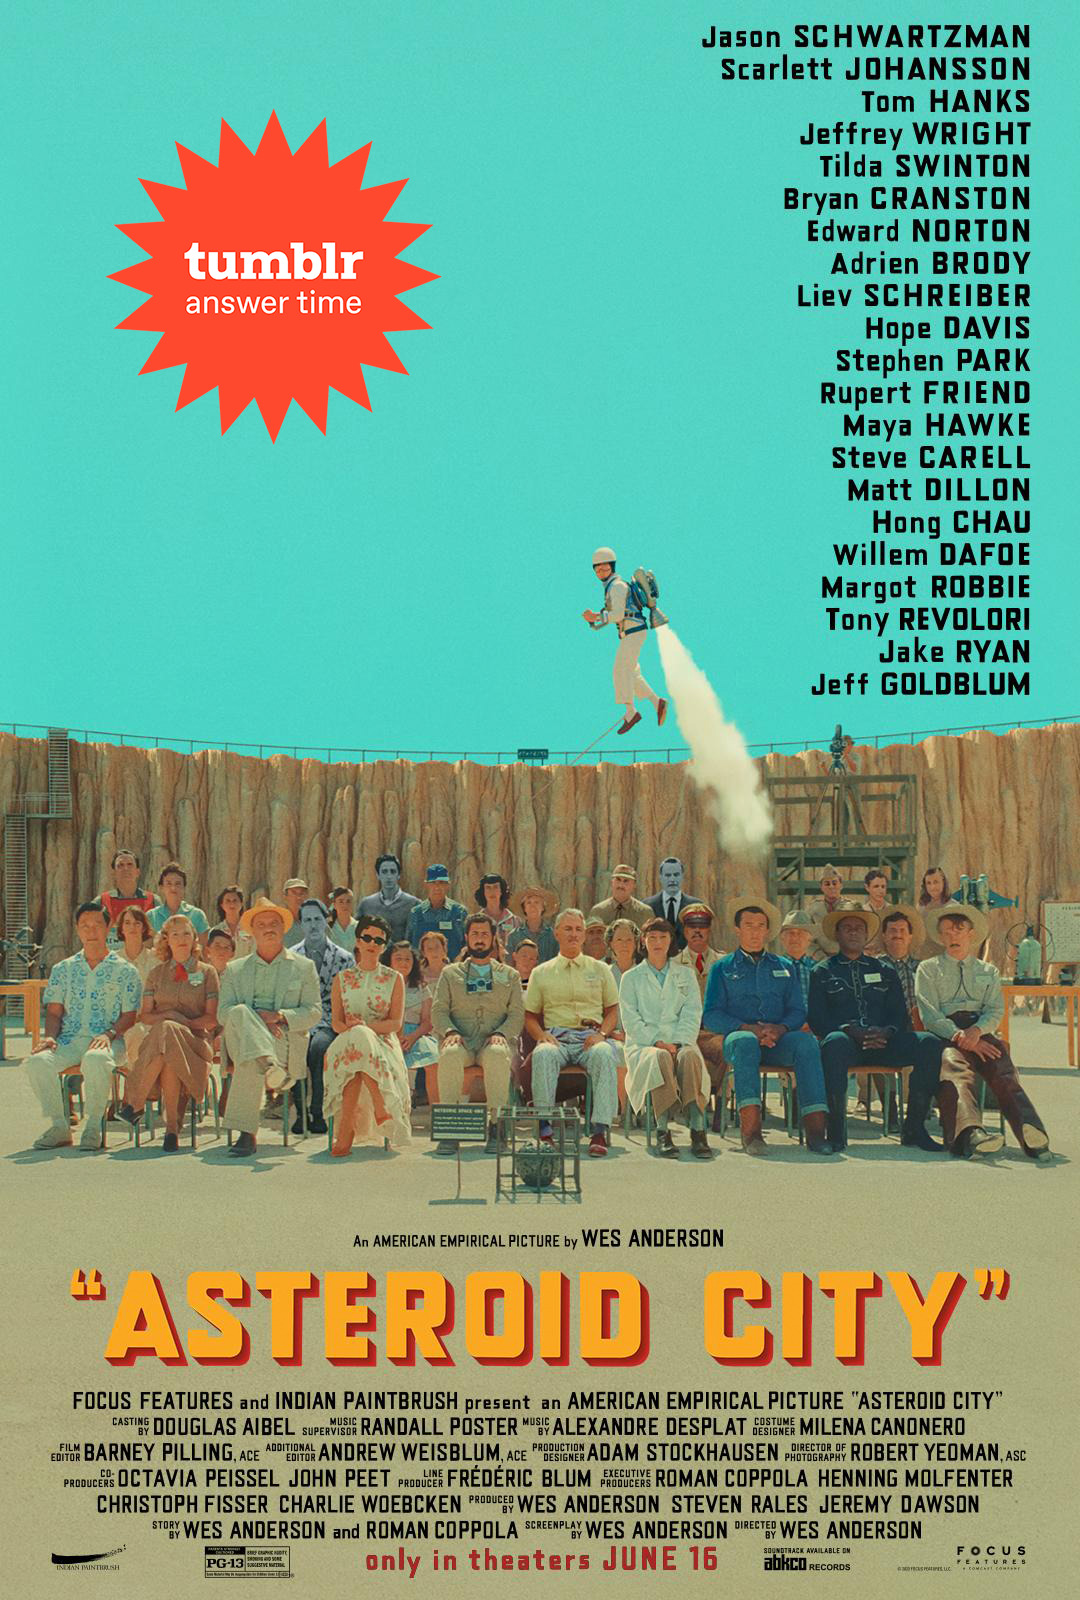 Have a question about Wes Anderson’s upcoming film, Asteroid City? The cast may have answers! Submit your questions here, and join the cast of Asteroid City for their Answer Time on June 20th at 12pm PT / 3pm ET.